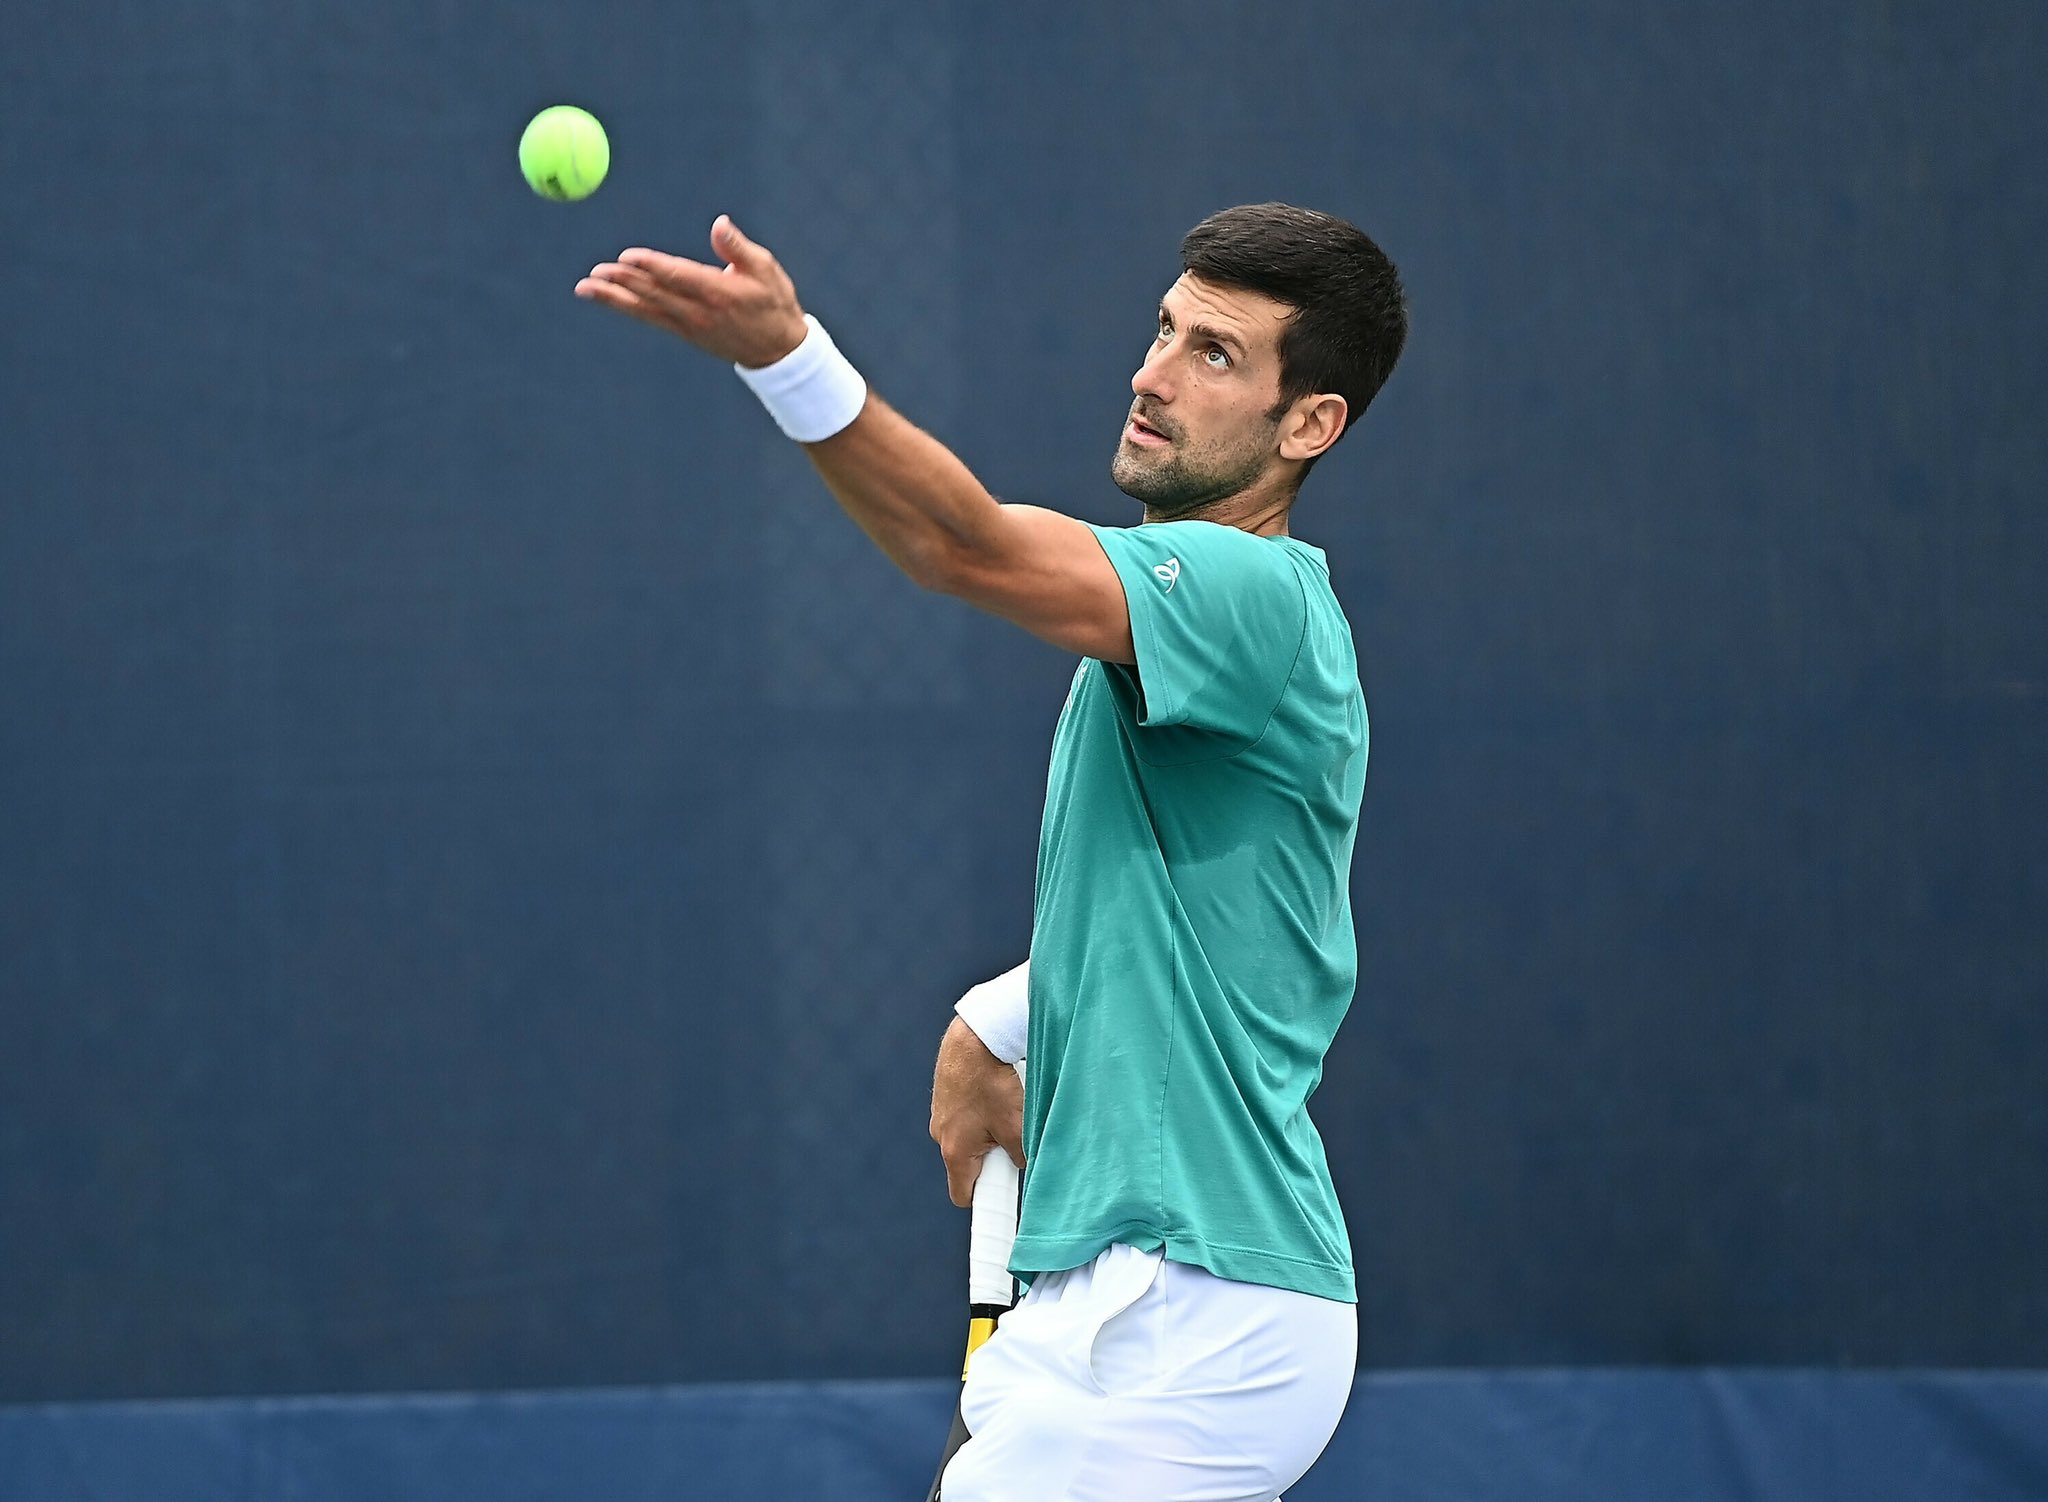 Novak Djokovic serving the ball at the US Open